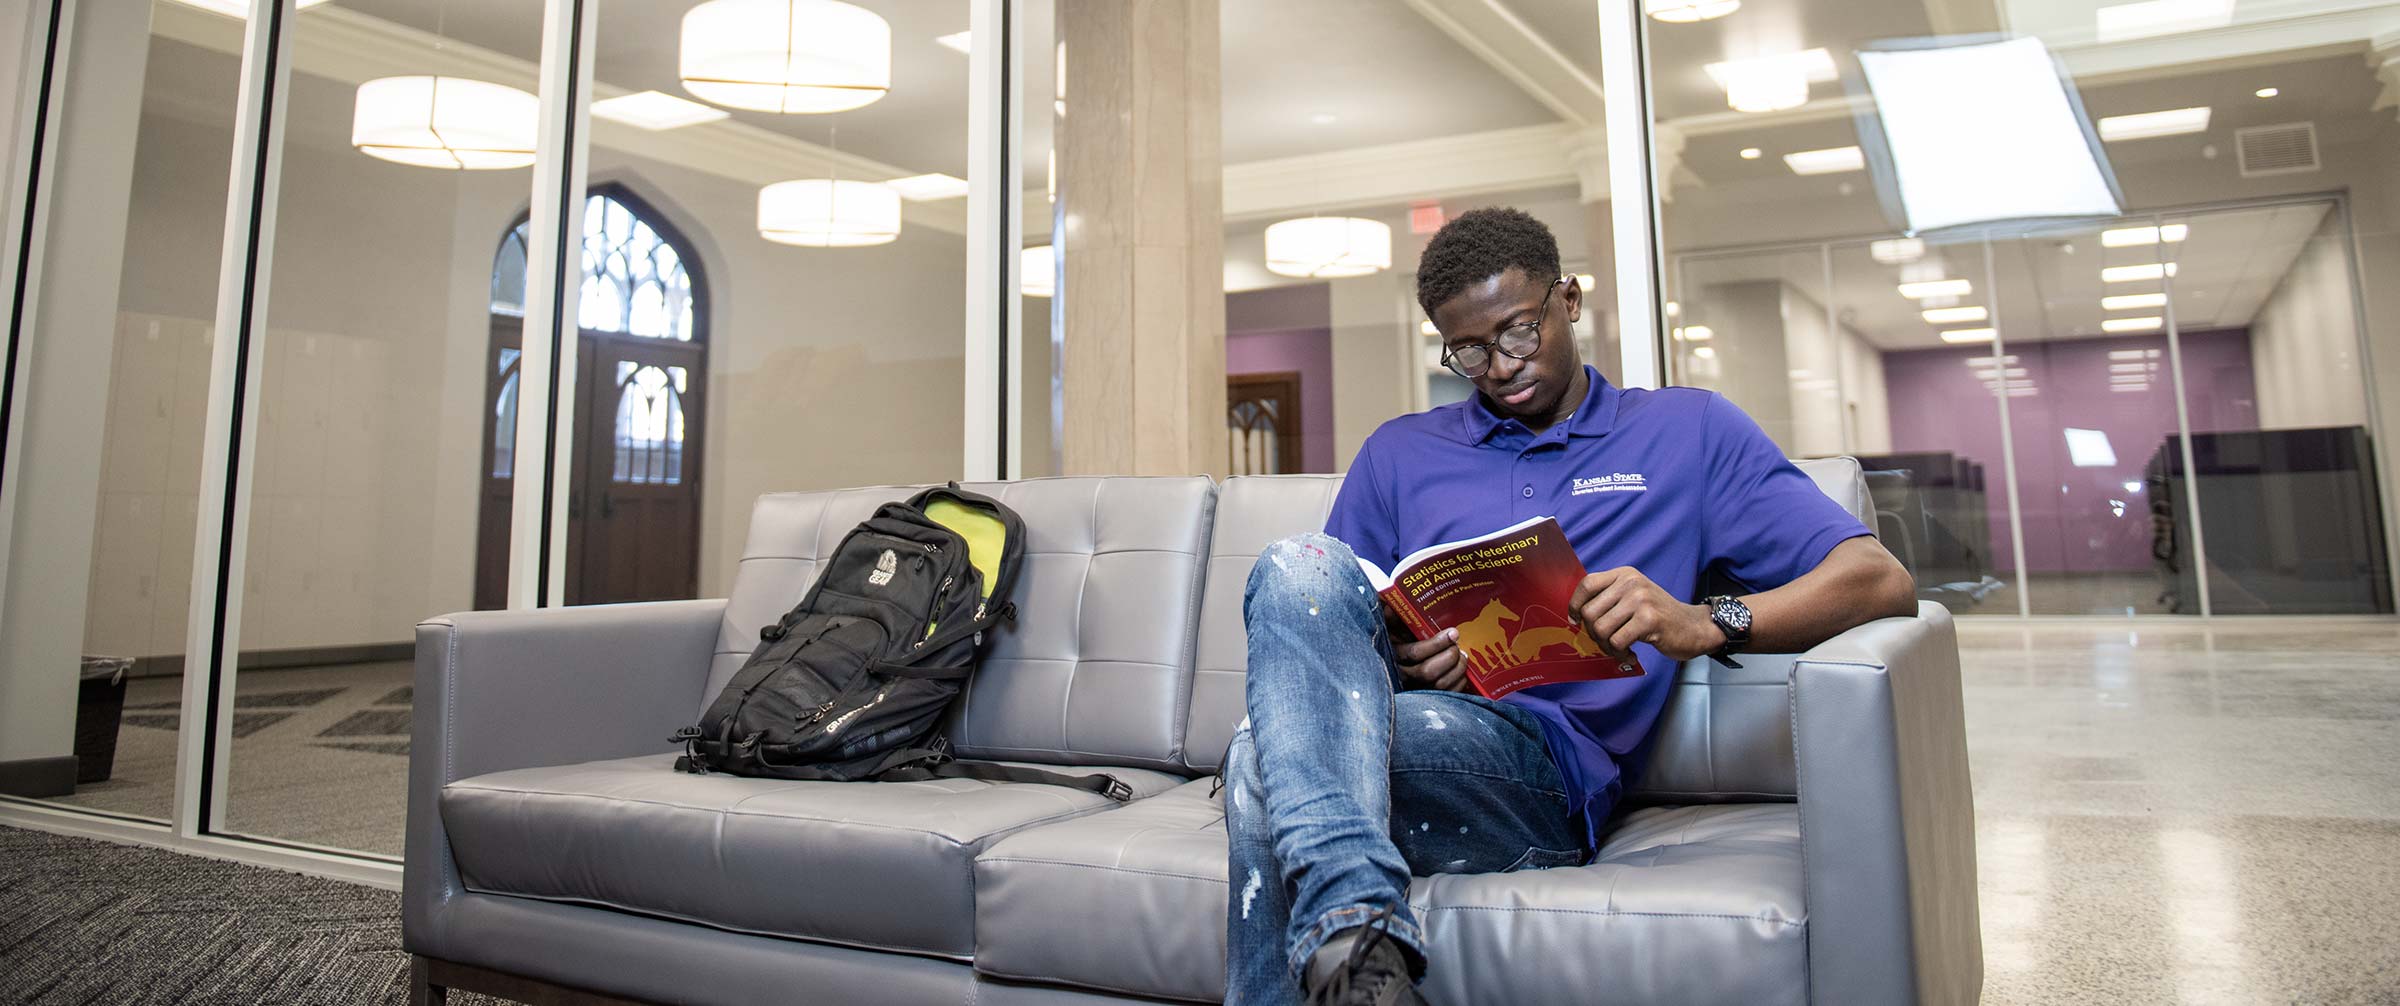 Graduate student in Hale Library study room on third floor